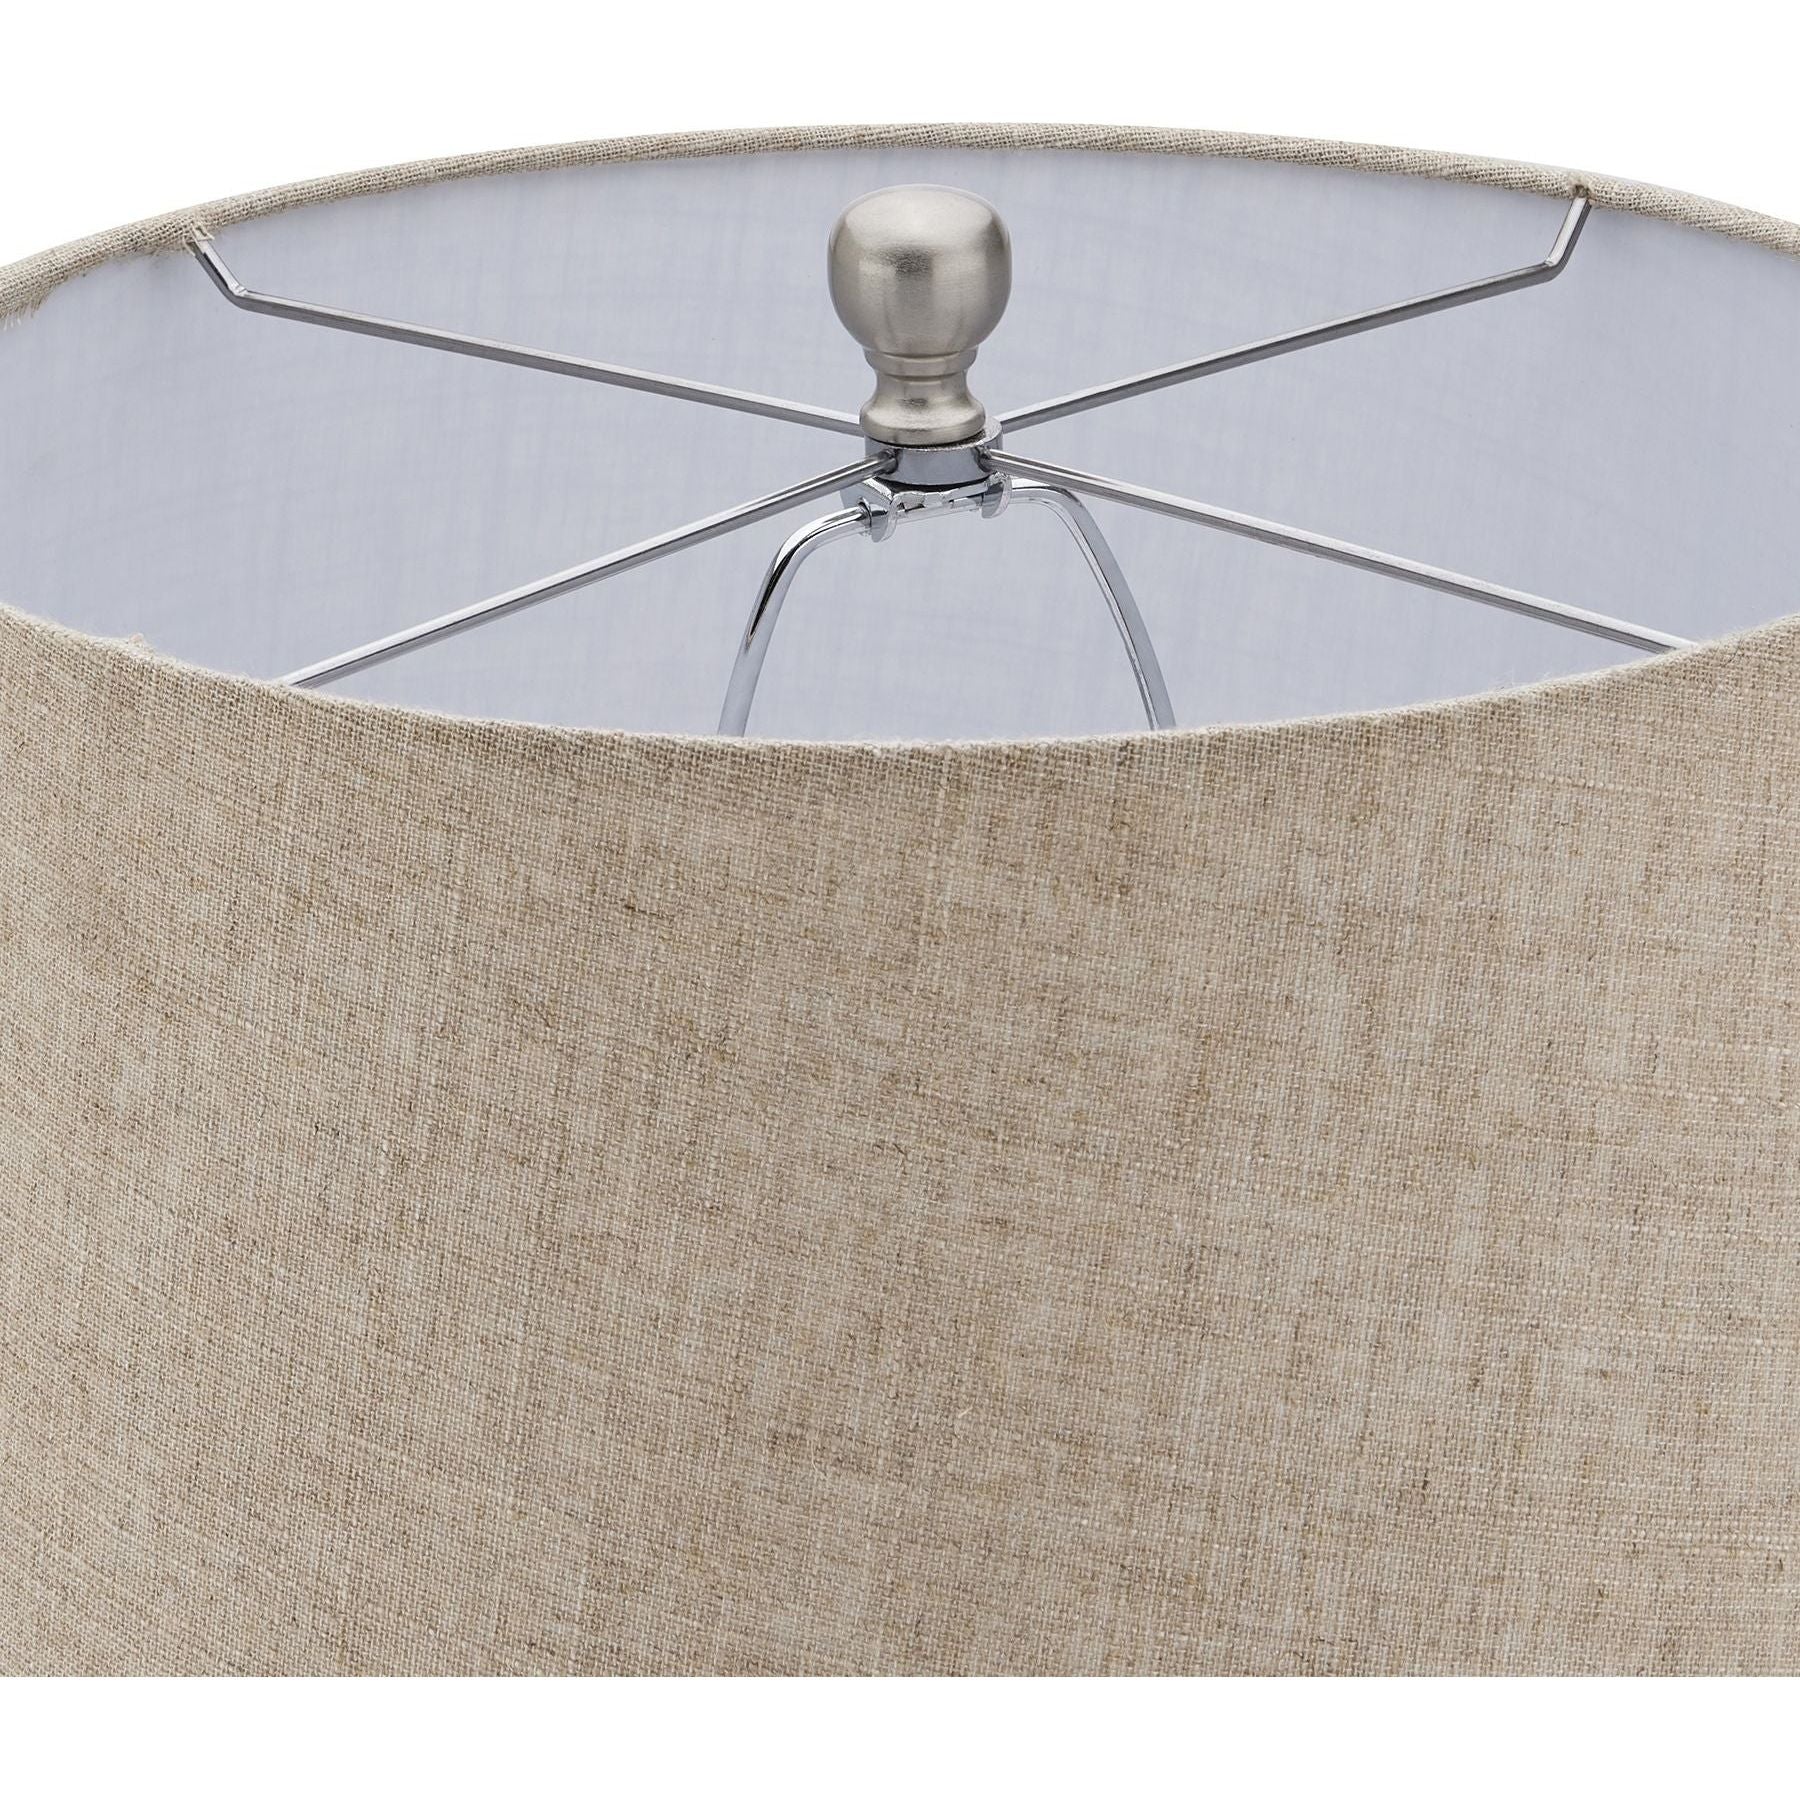 Acantho Grey Ceramic Lamp With Linen Shade - Ashton and Finch